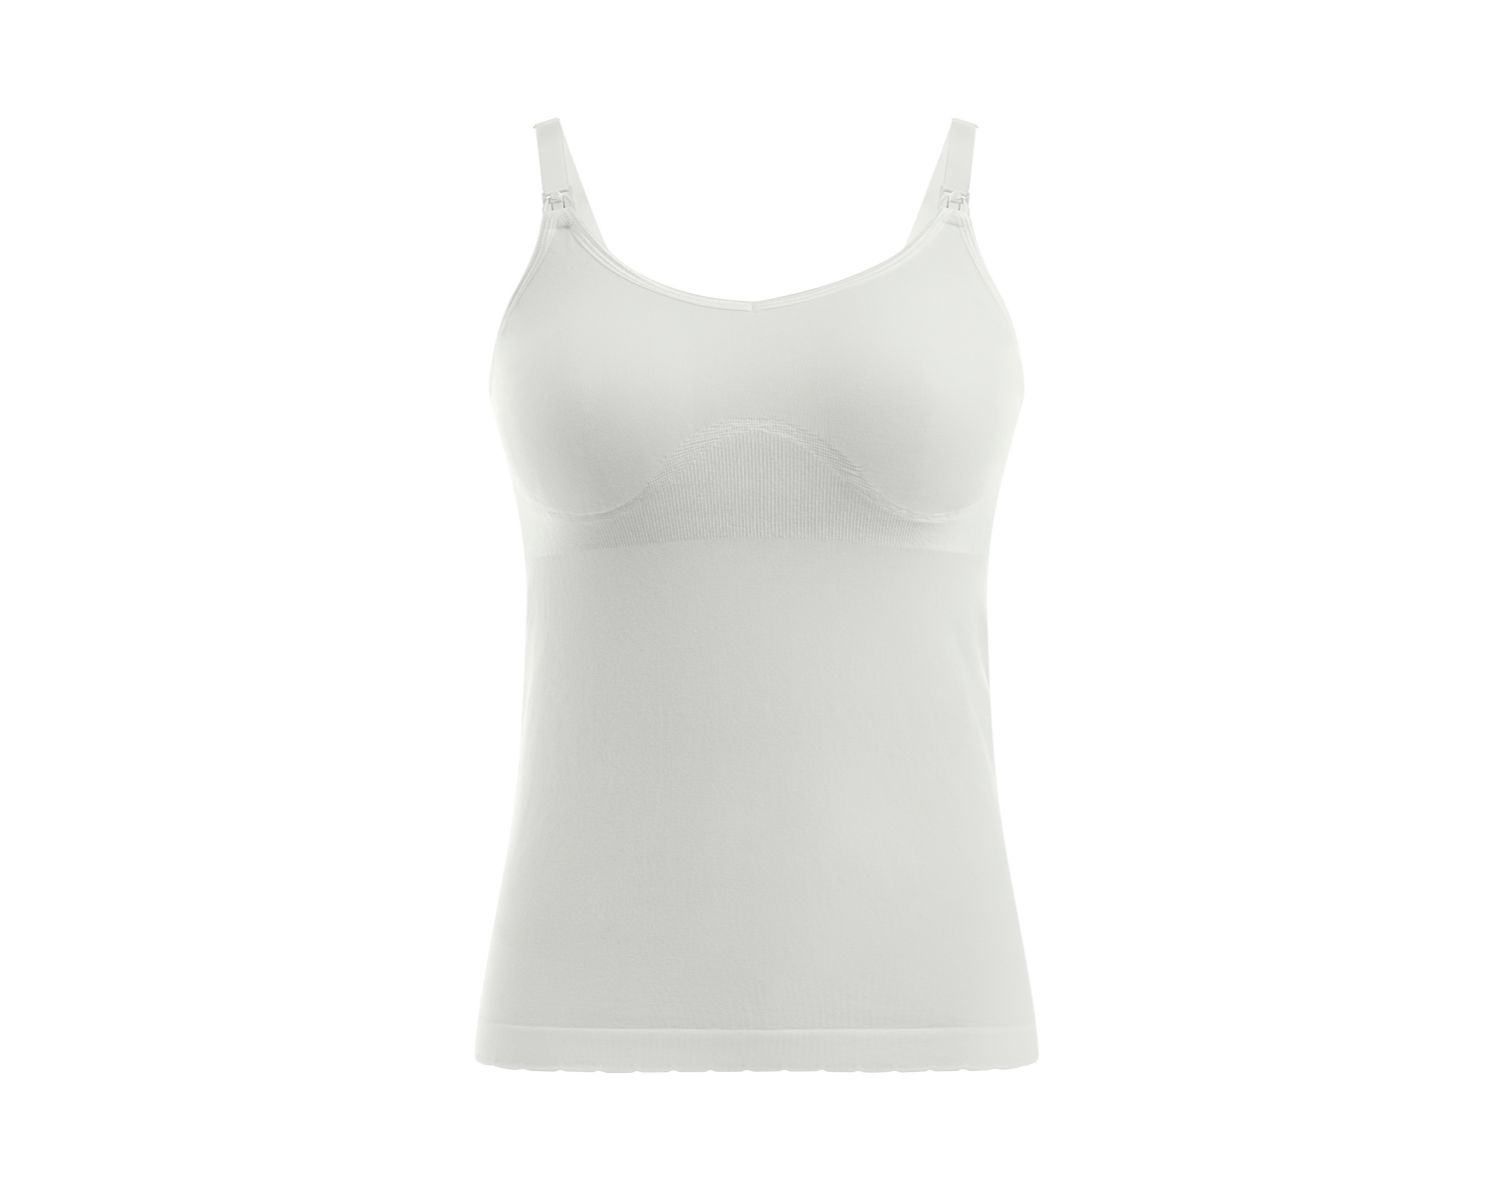 Nursing Tank Top Review: The Best Choice for New Moms